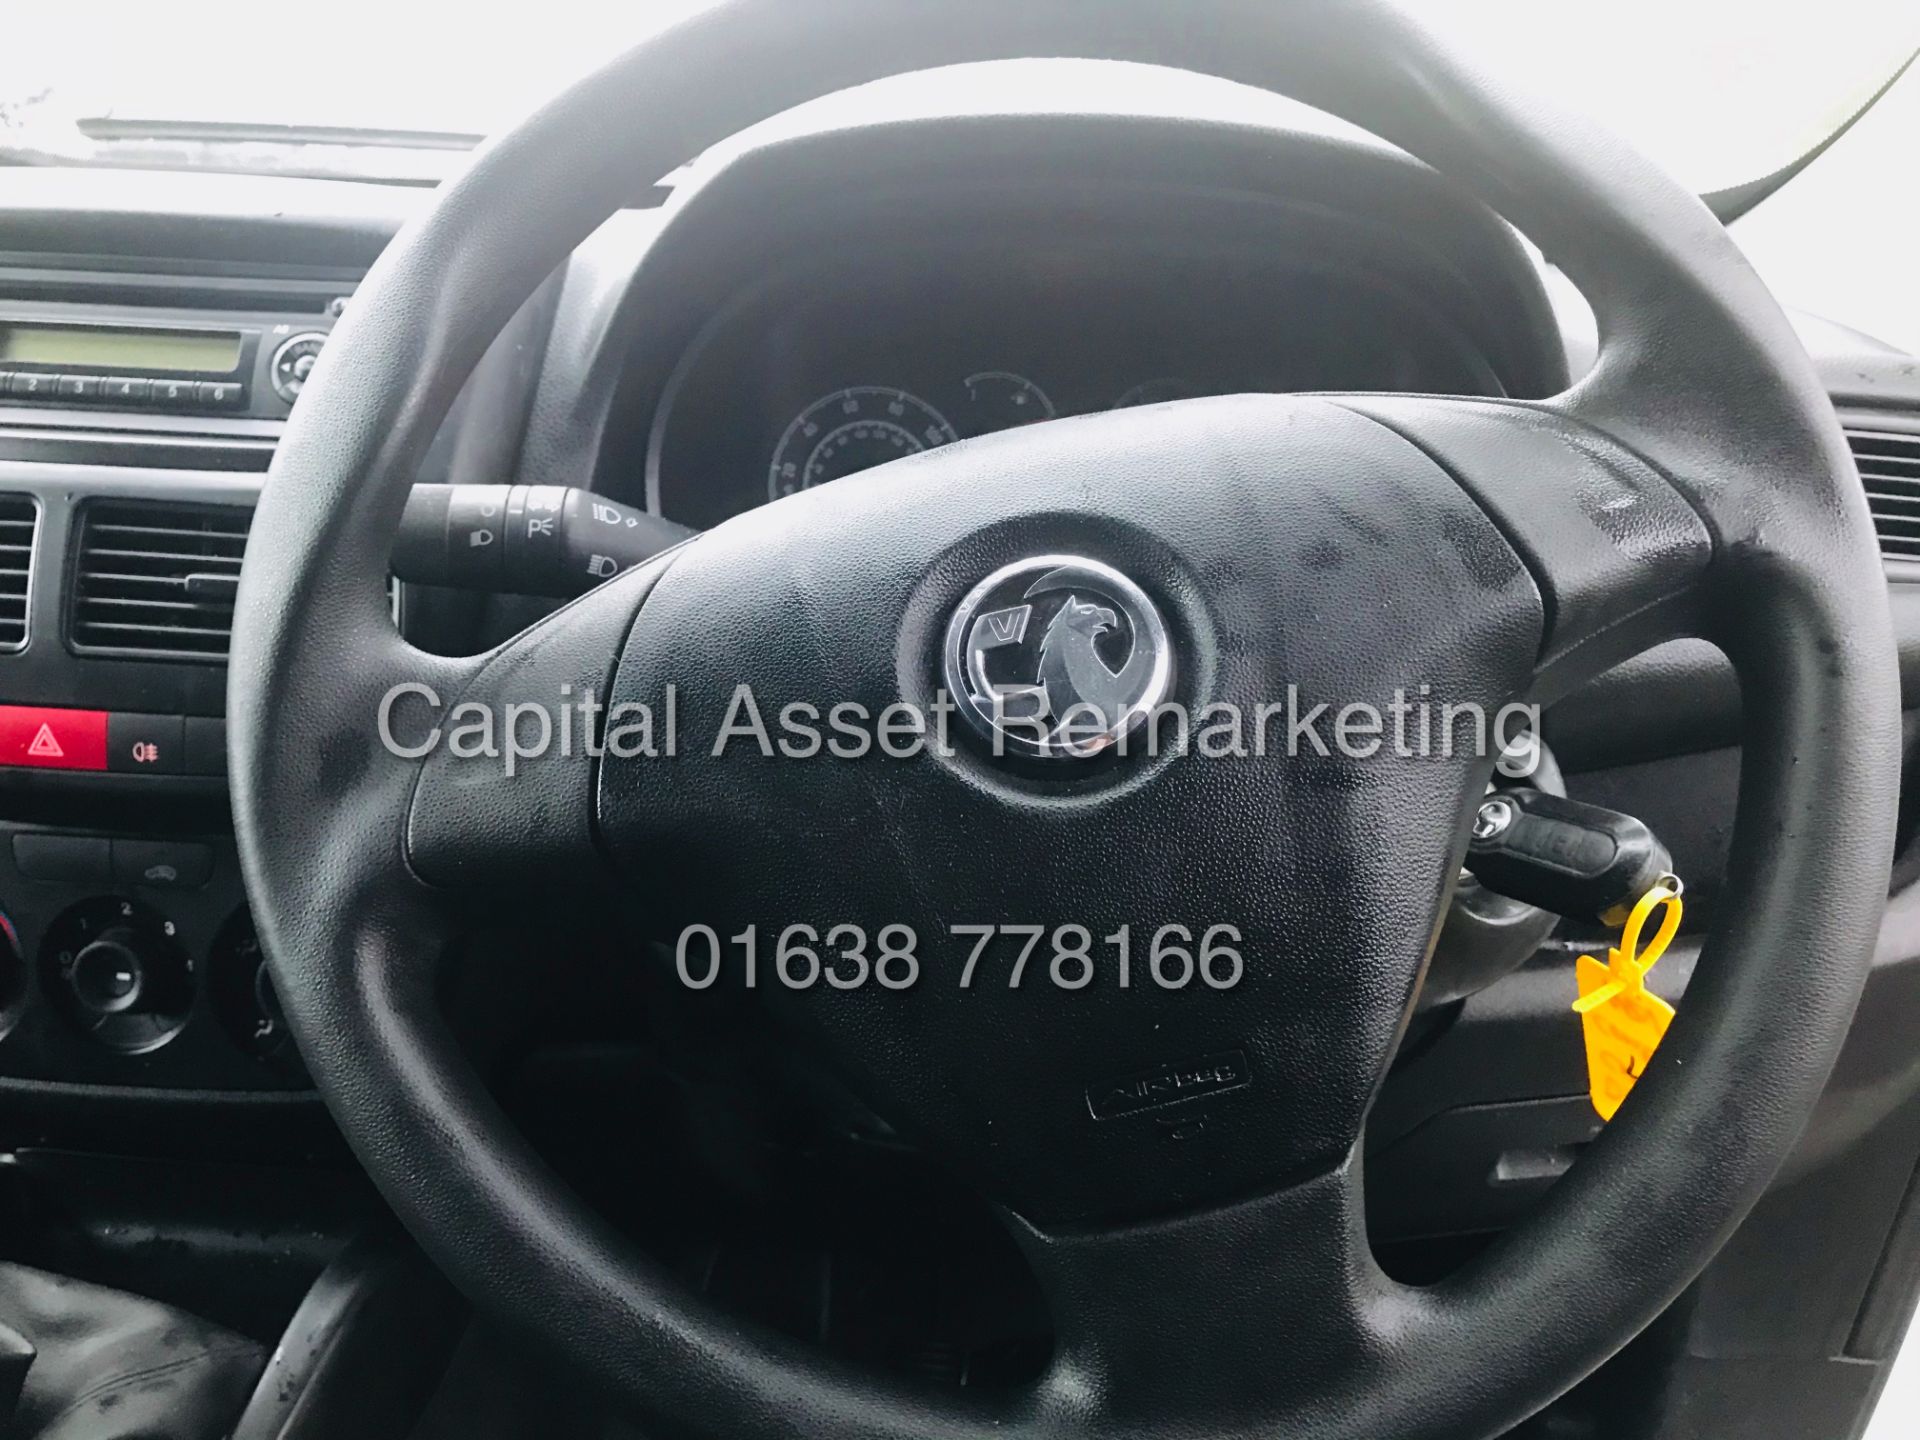 (On Sale) VAUXHALL COMBO 2000 "CDTI" 16v ECO FLEX -2016 - 1 KEEPER -ONLY 58K MILES - SERVICE HISTORY - Image 8 of 13